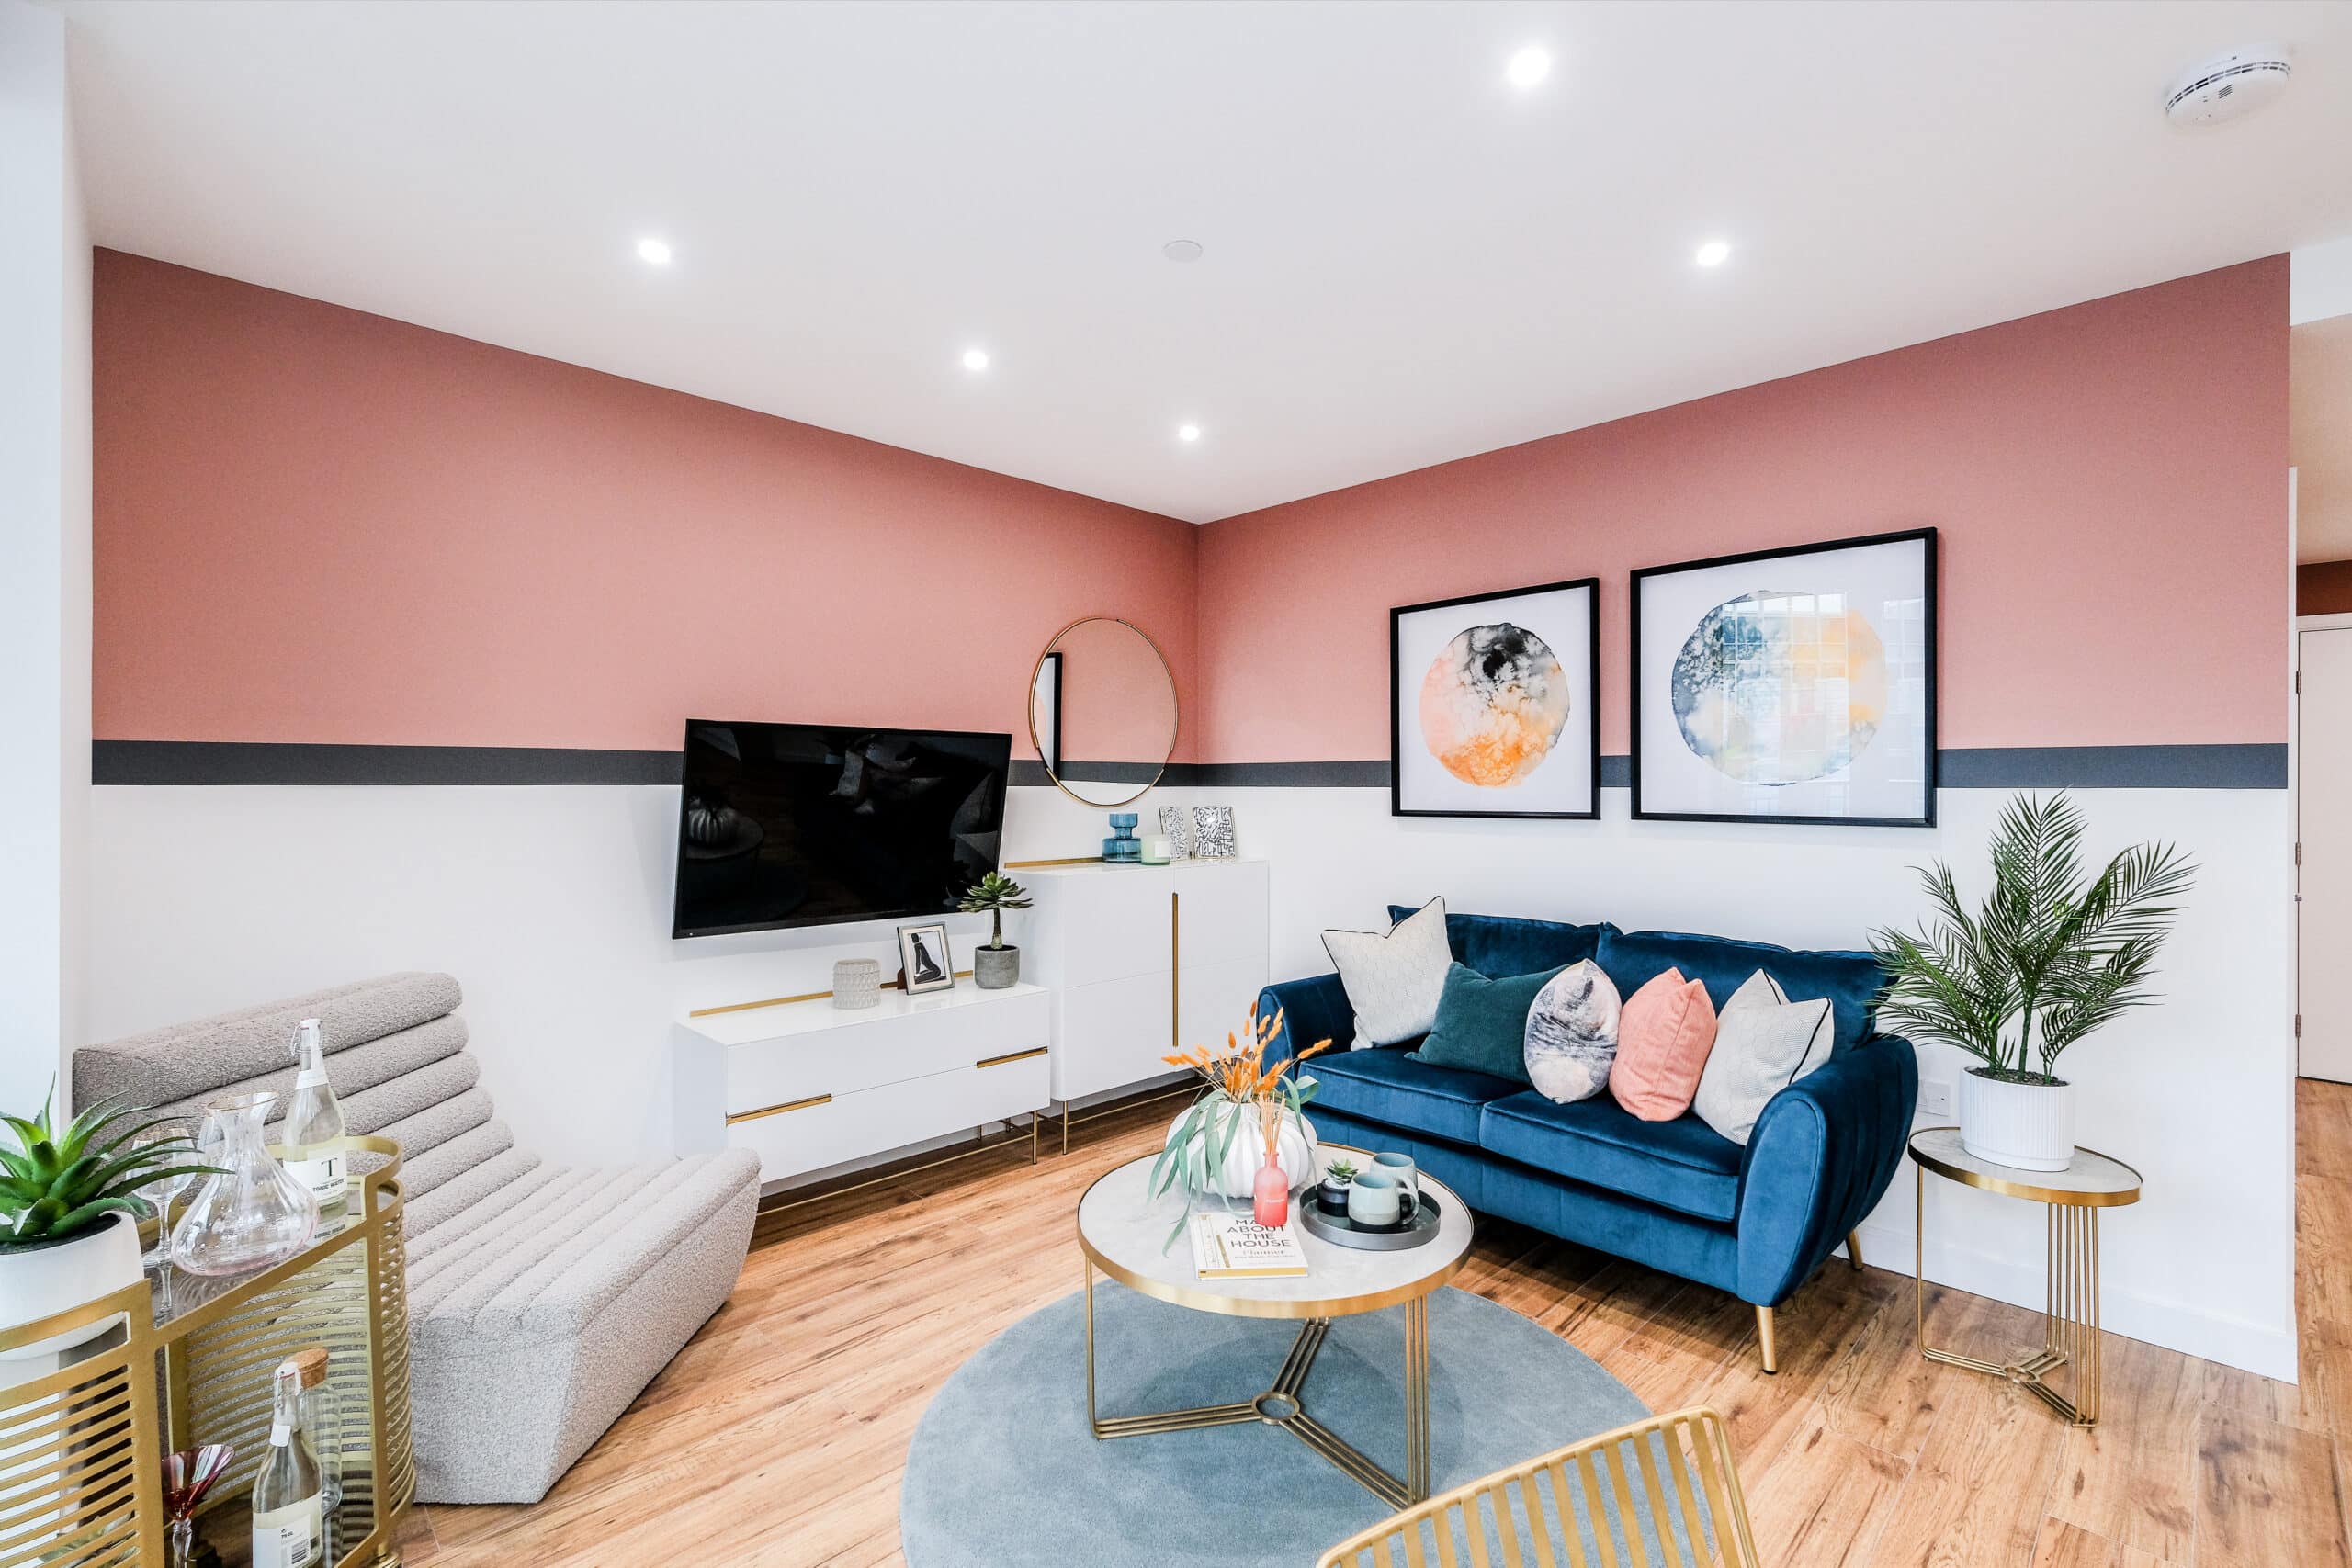 An image of Windsor Apartments by Latimer by Clarion Housing group - available to purchase through Shared Ownership on Share to Buy!